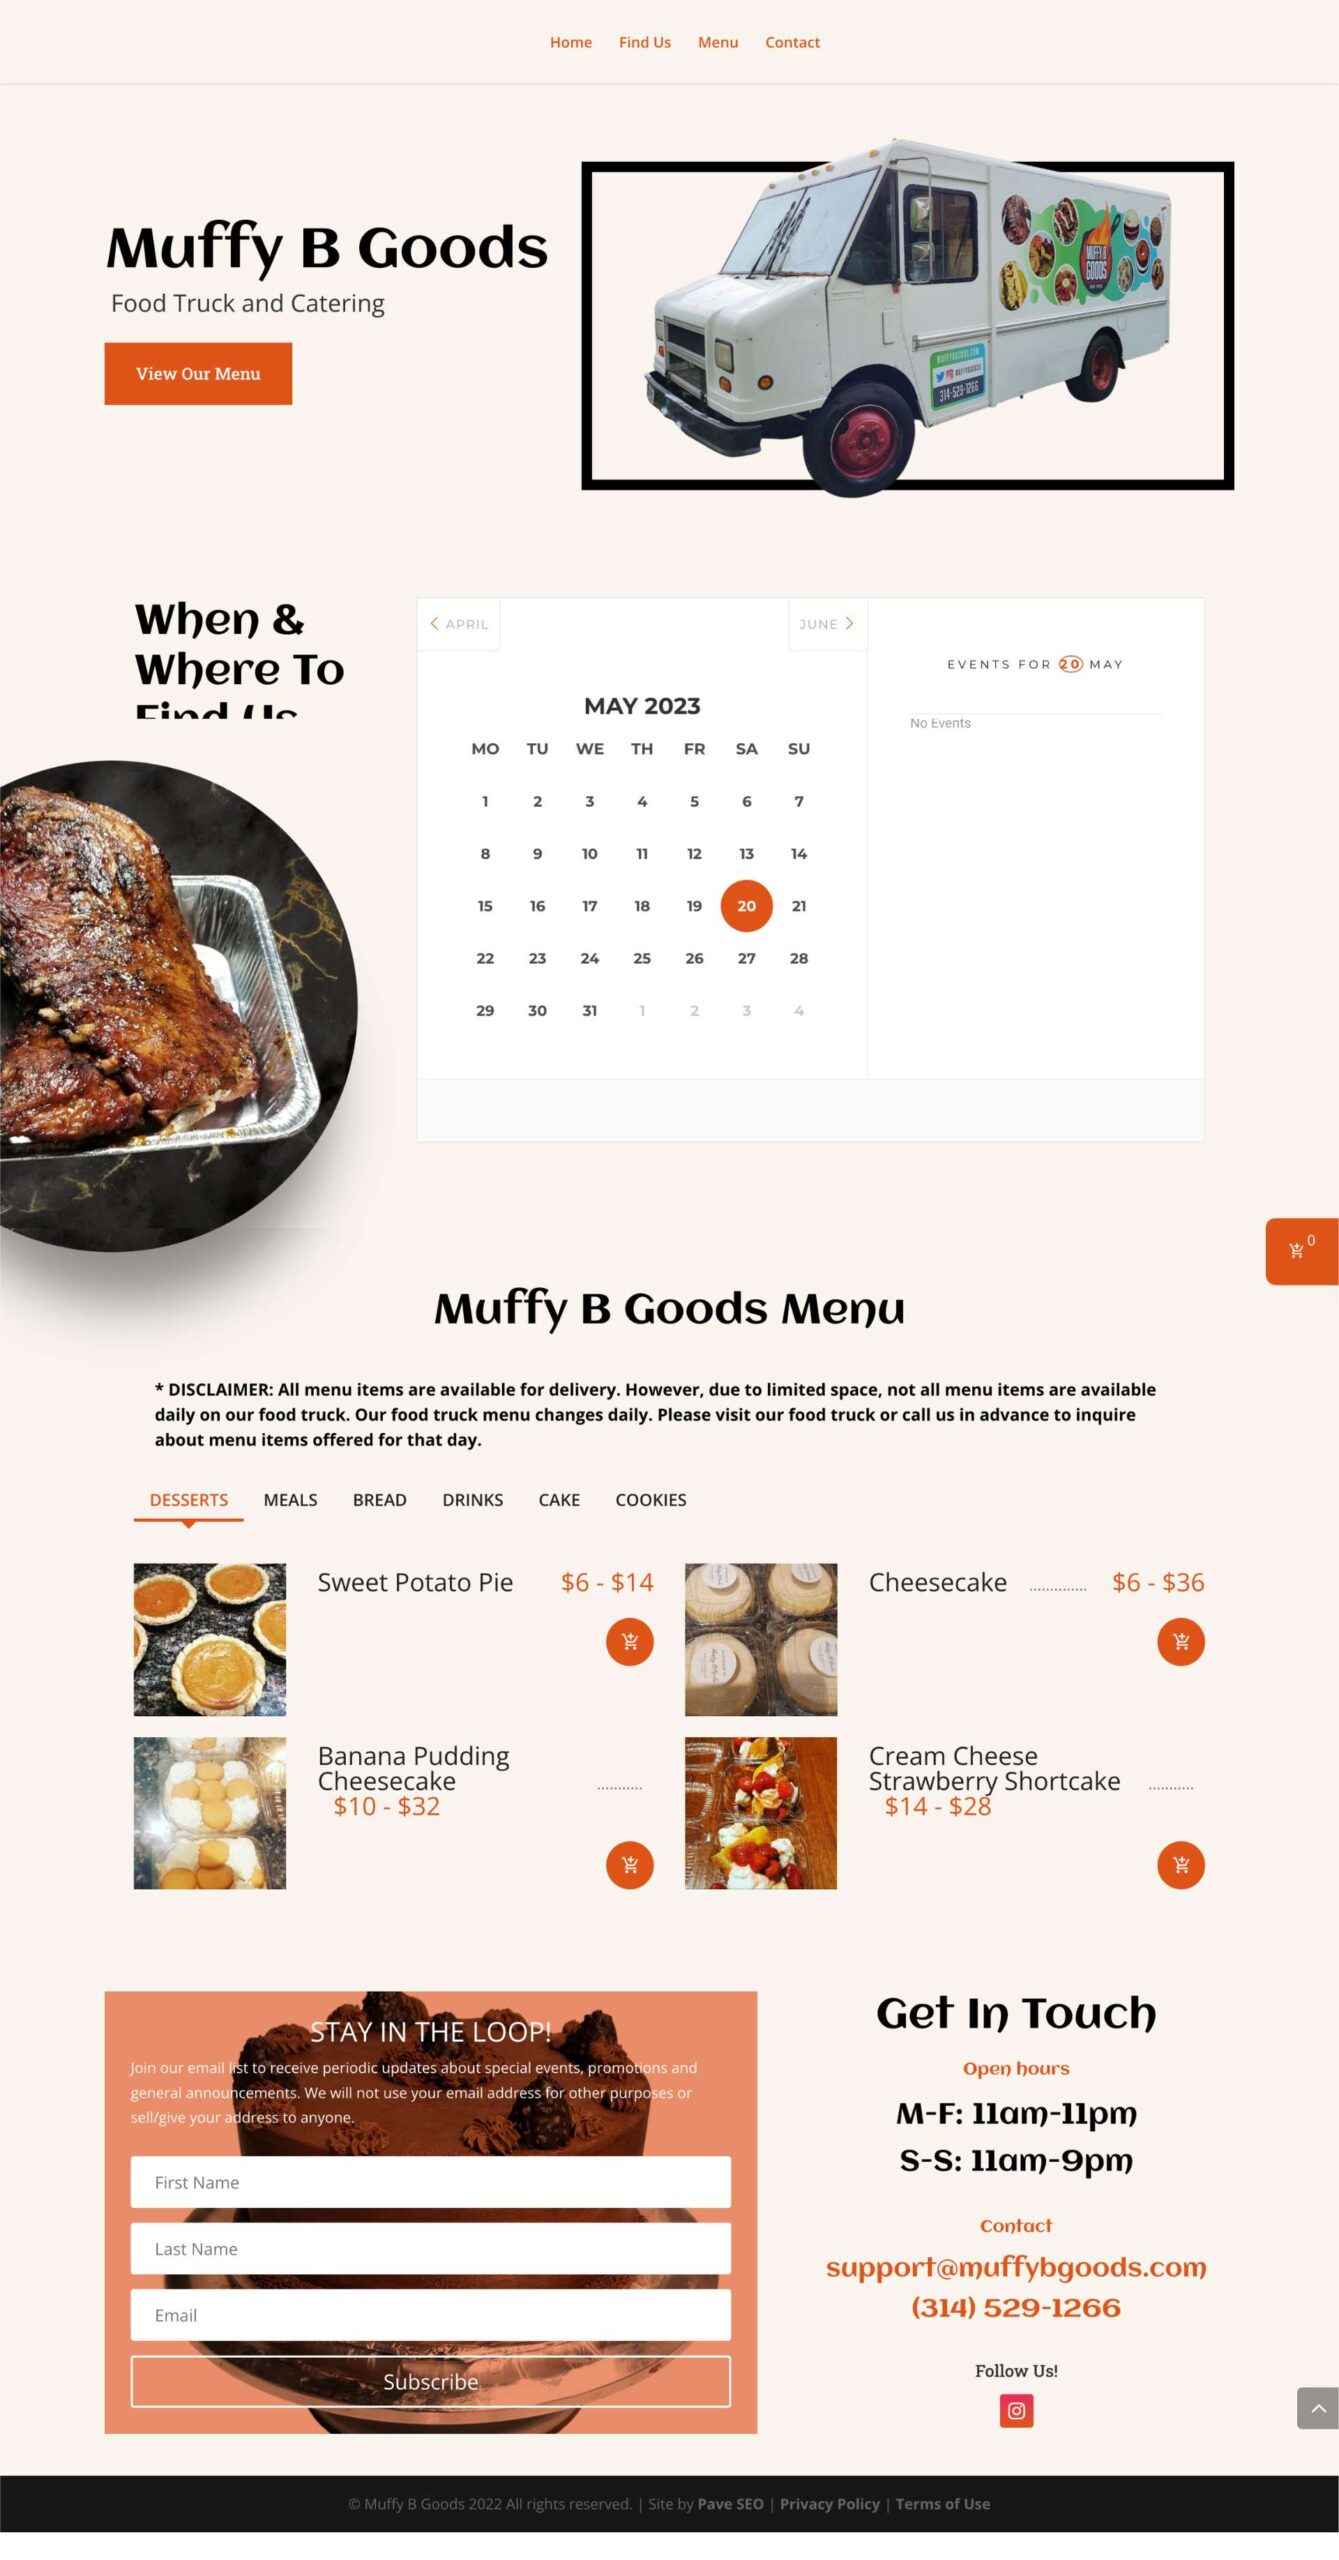 Muffy B Goods Food Truck and Catering Company SEO Web Design